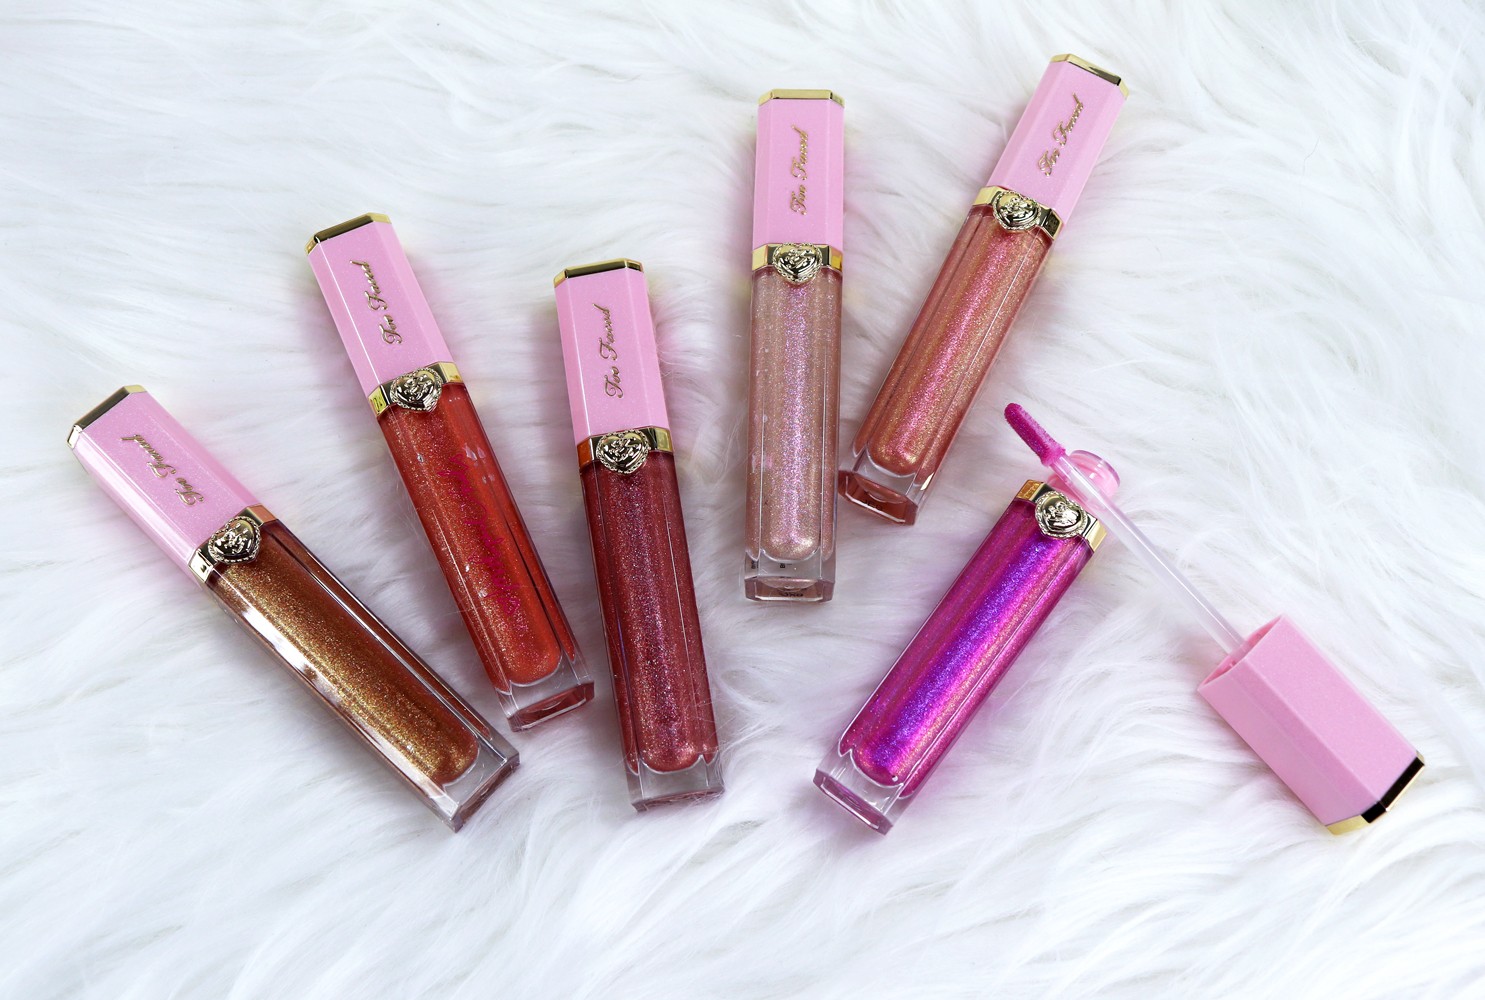 Cruelty Free Holiday Gift Guide - Too Faced Pretty Rich Lip Gloss